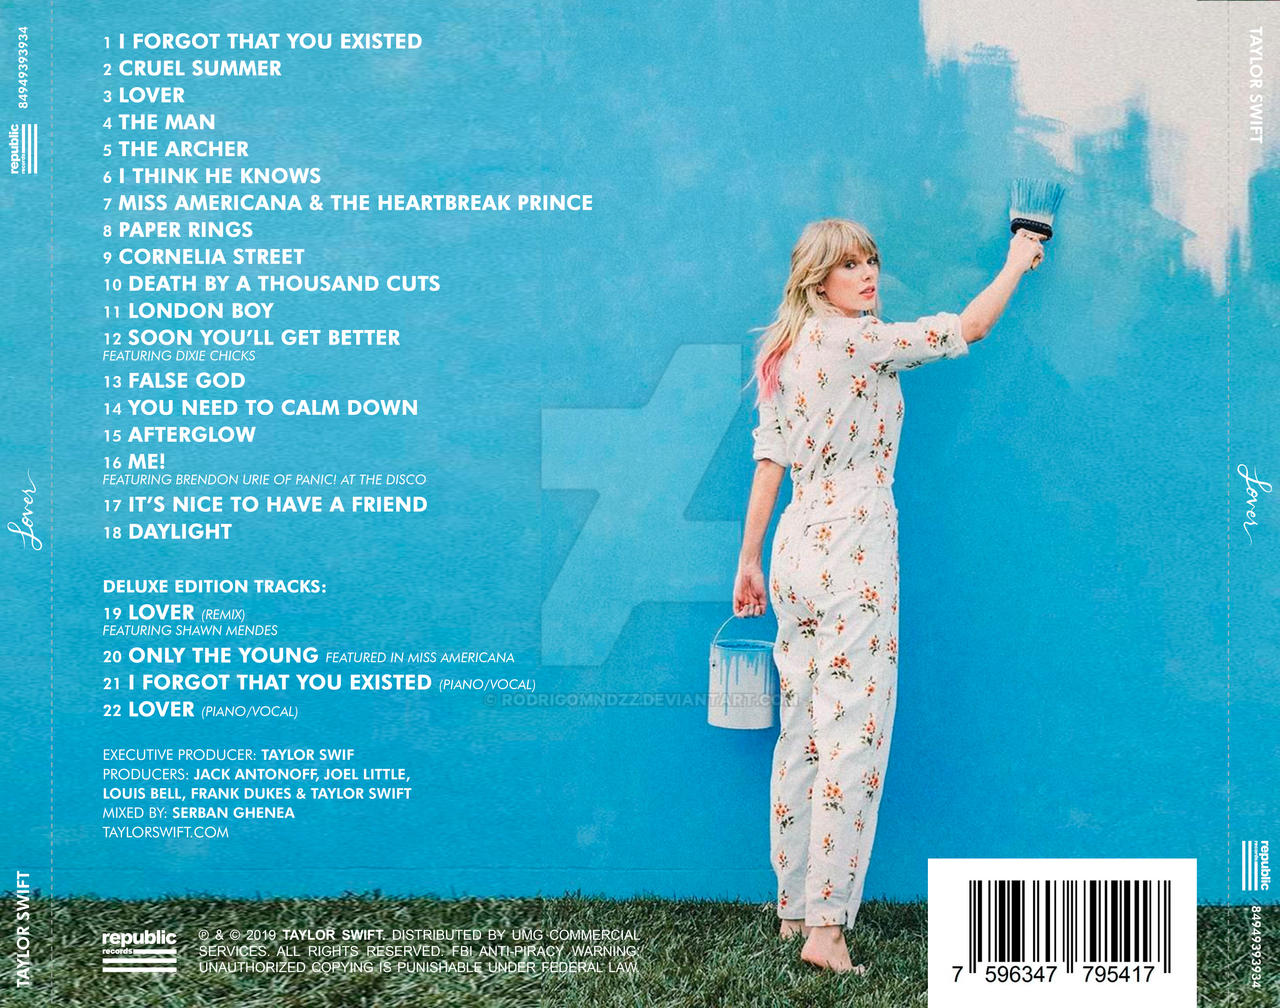 Taylor Swift - Lover (Deluxe) | Back Cover #6 by rodrigomndzz on DeviantArt